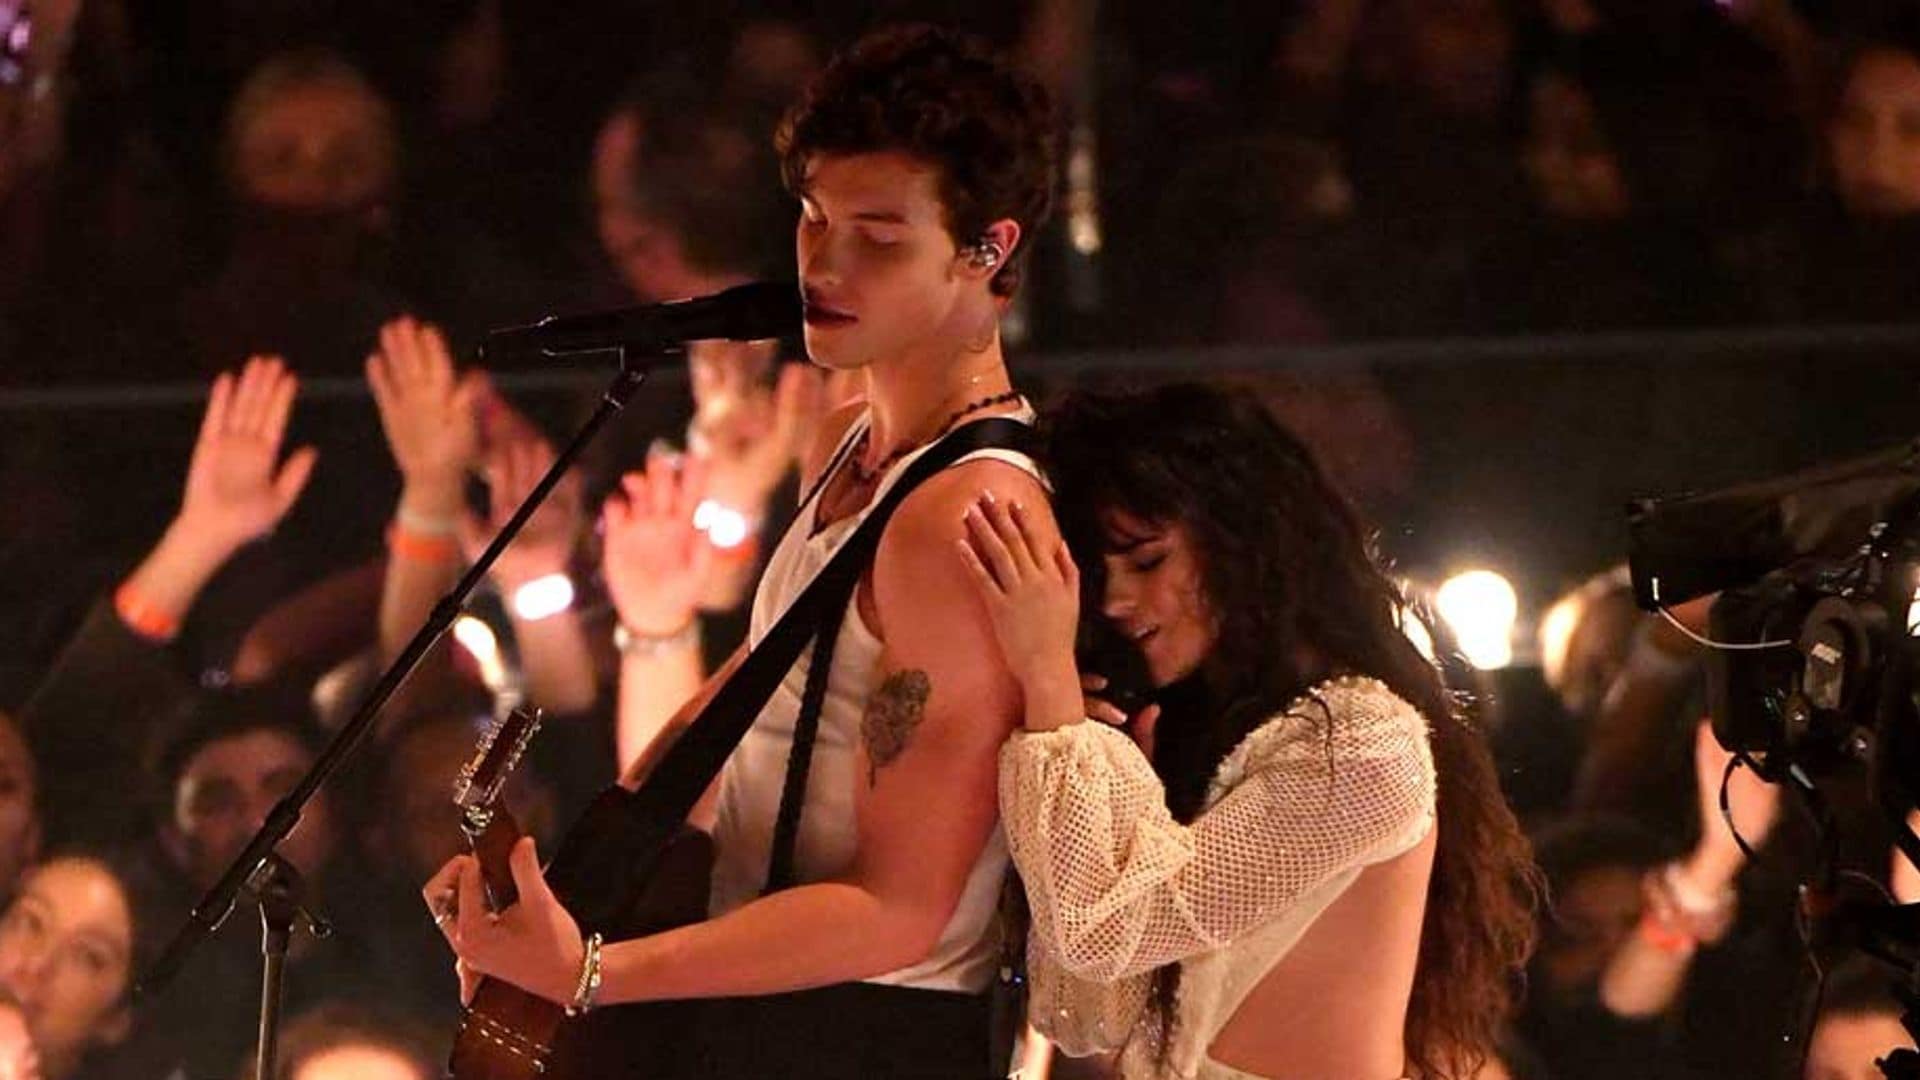 Camila Cabello and Shawn Mendes bring the PDA to the stage during Señorita performance